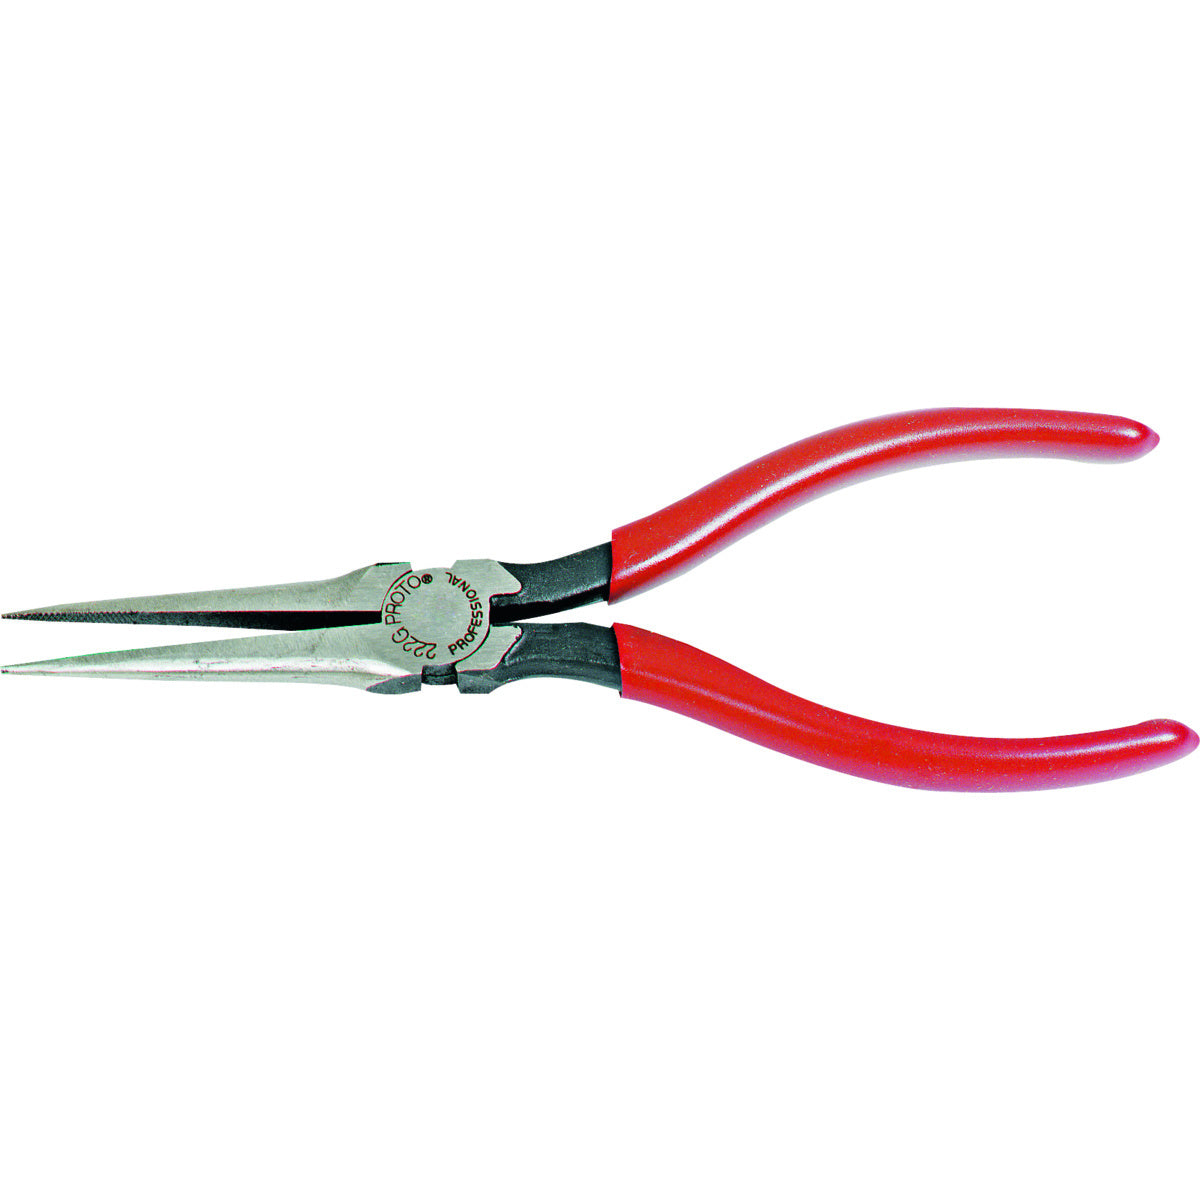 Stanley® 2 5/32" X 6 5/32" Steel Proto® Needle Nose Plier With Red Plastic Dipped Handle